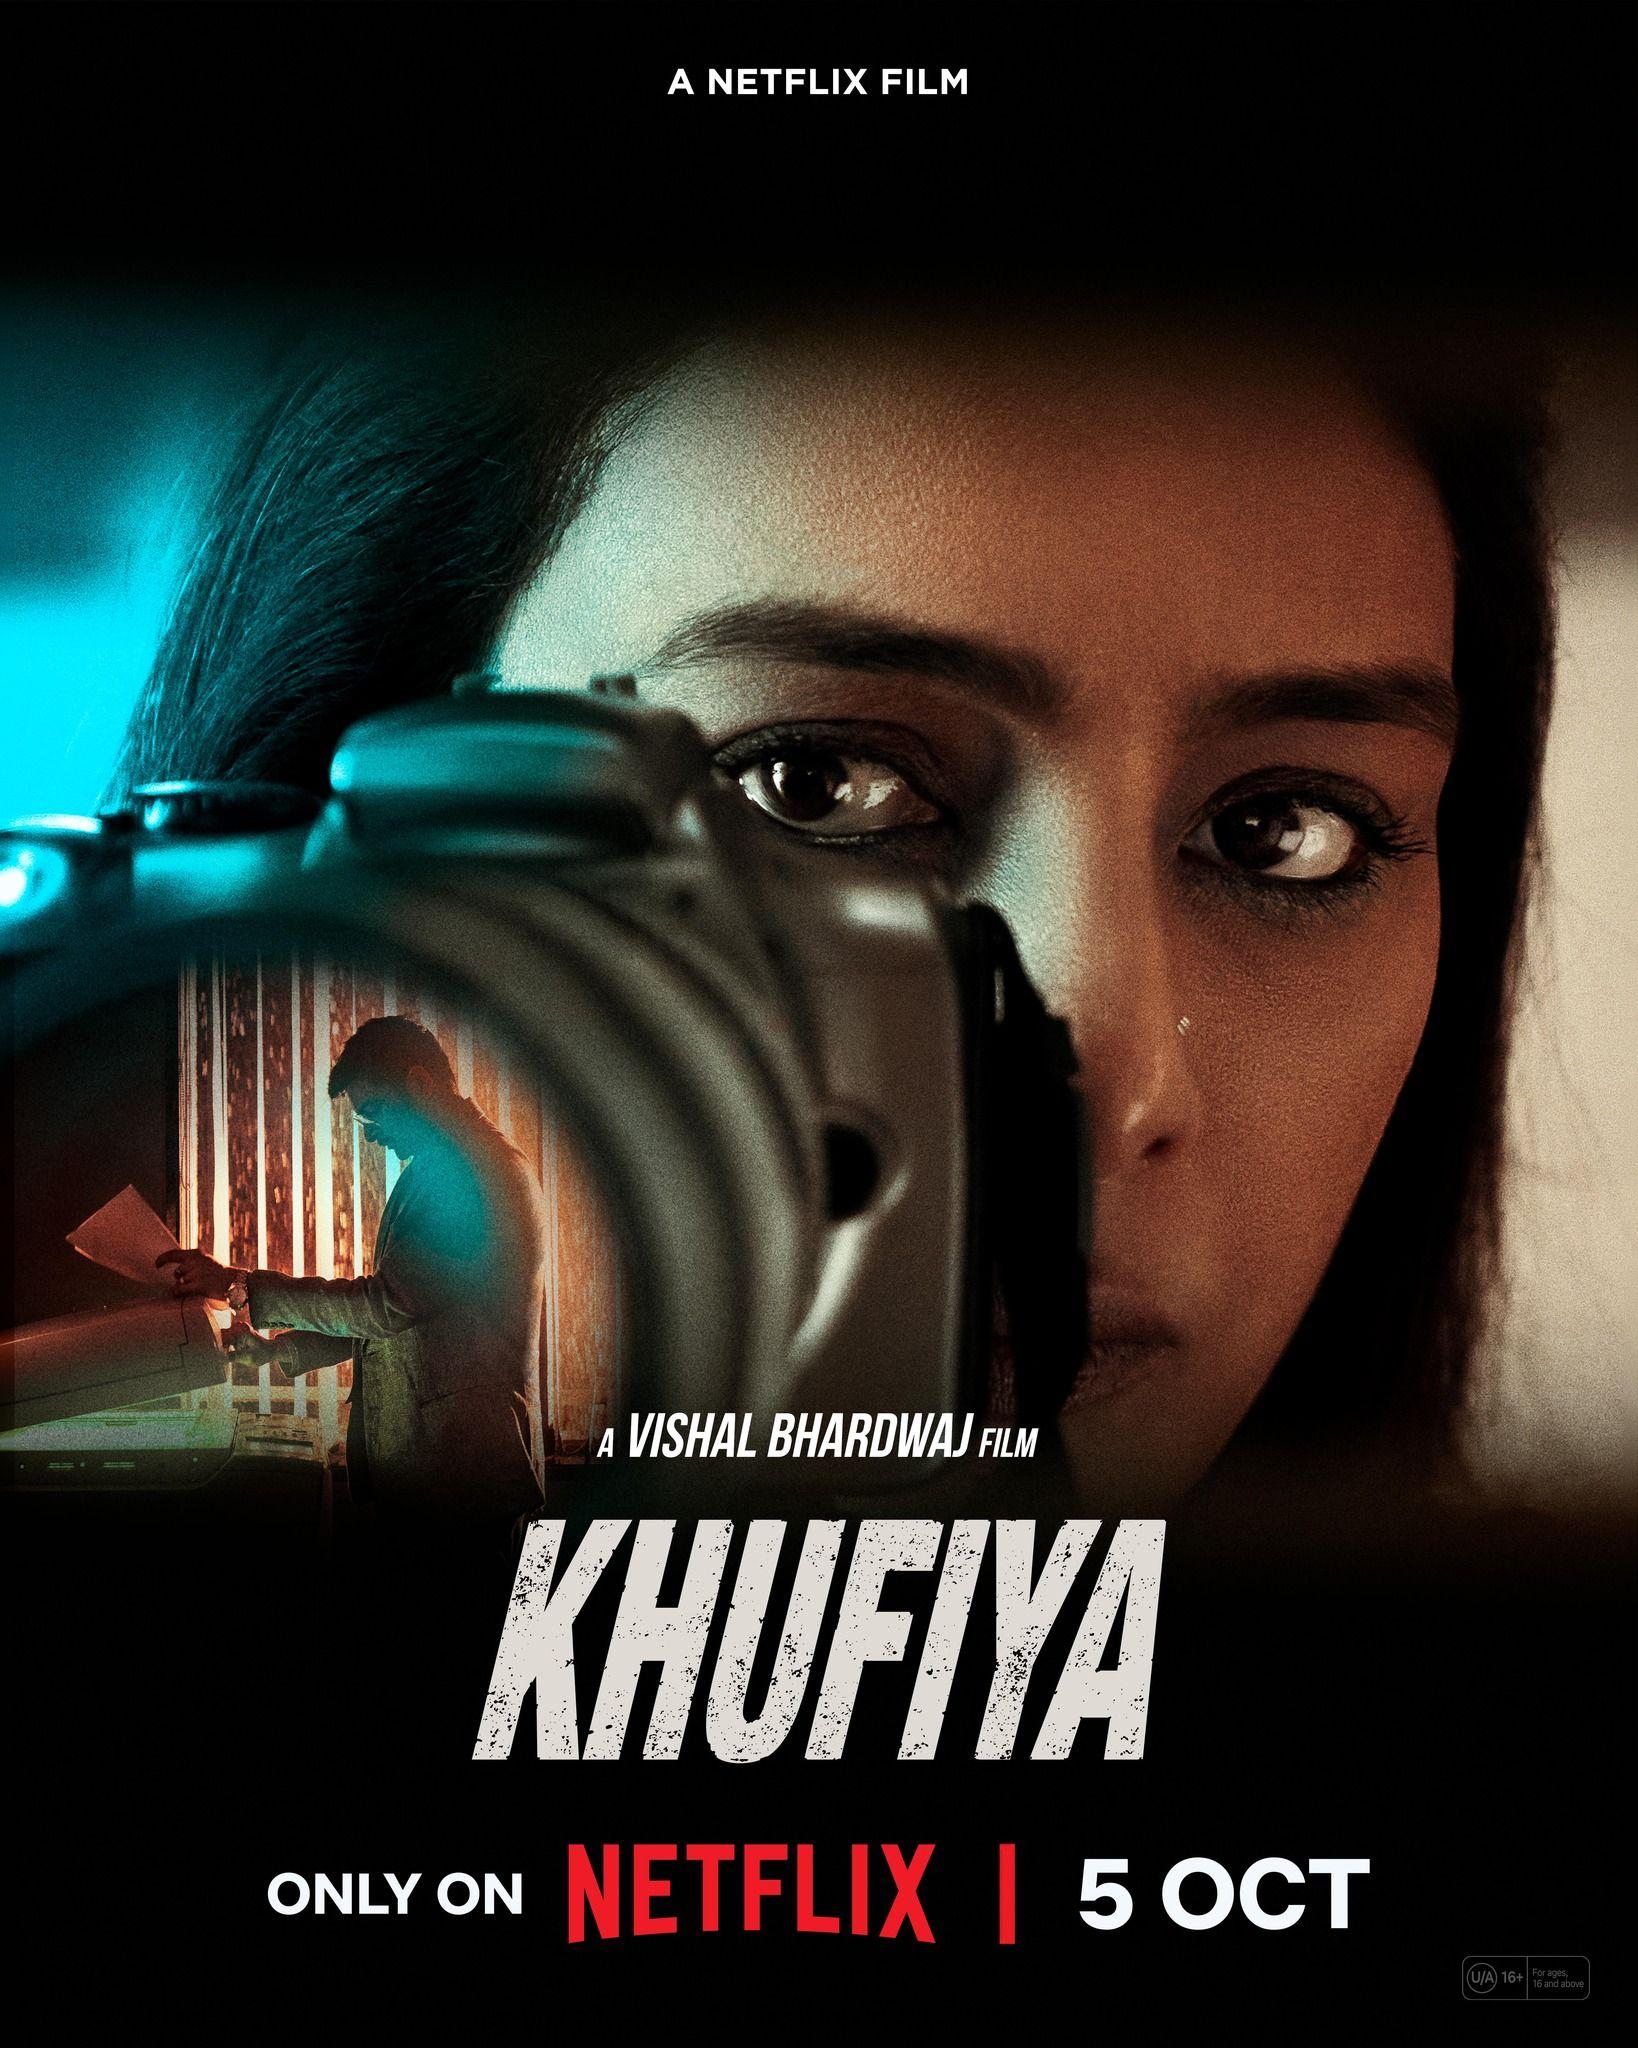 Khufiya - 5 October 
'Khufiya' takes viewers into the shadowy world of espionage as Krishna Mehra, an operative at the Indian spy agency R&AW, is tasked with a high-stakes mission. She must track down a mole selling India's defense secrets while navigating the complexities of her dual identity as a spy and a lover. This thrilling OTT series promises intrigue, suspense, and a riveting exploration of espionage.